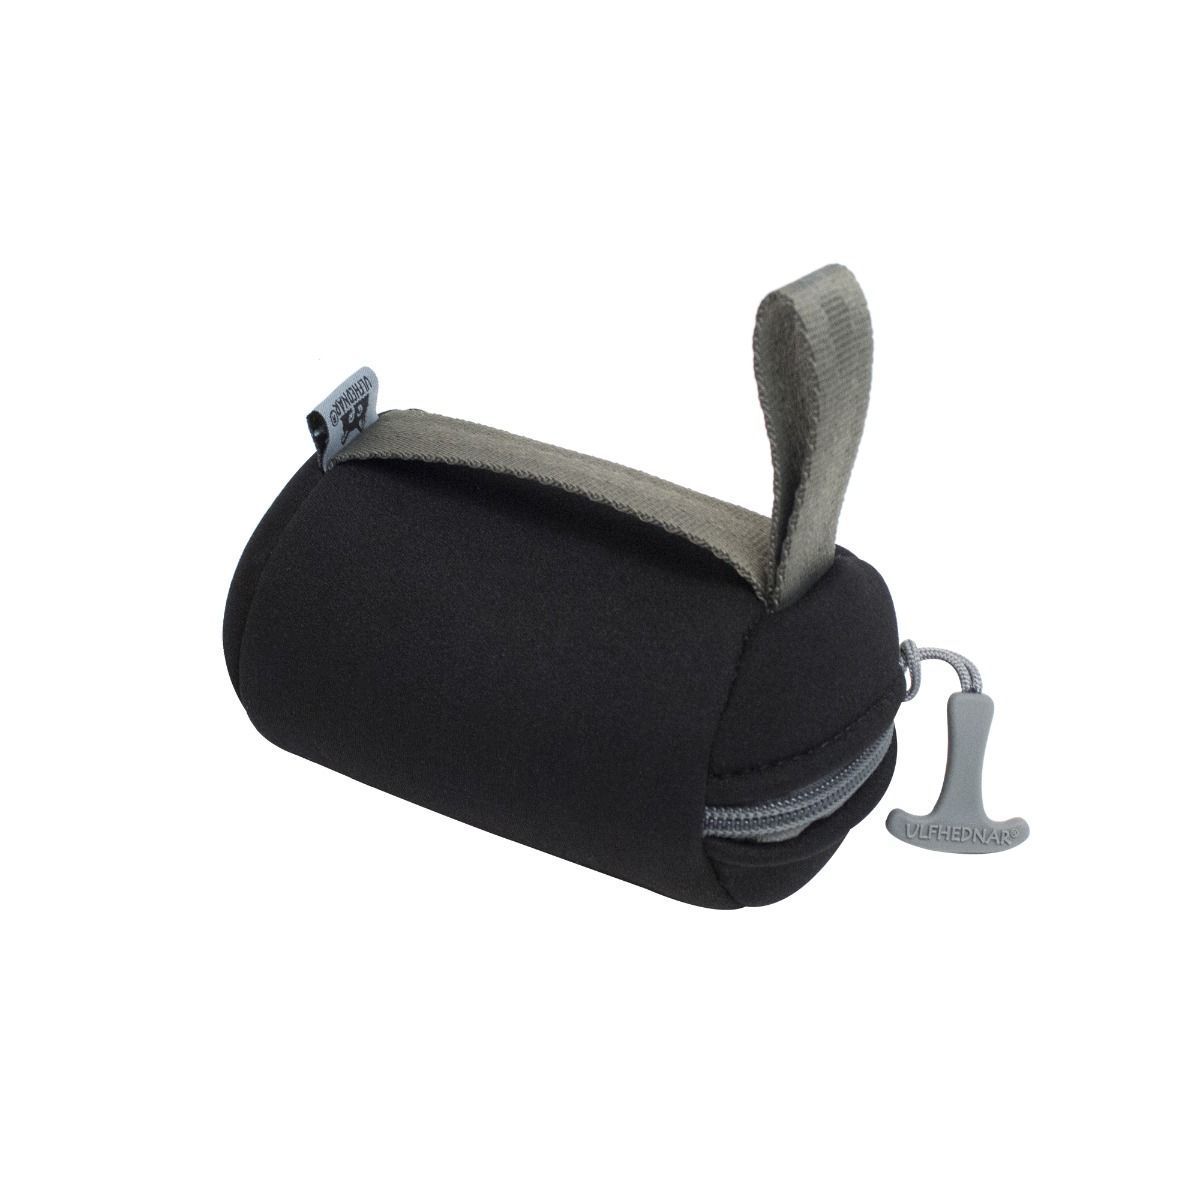 Ulfhednar Rear Support PRS Shooting Bag Rest "Squeezy" #UH105 - Australian Tactical Precision